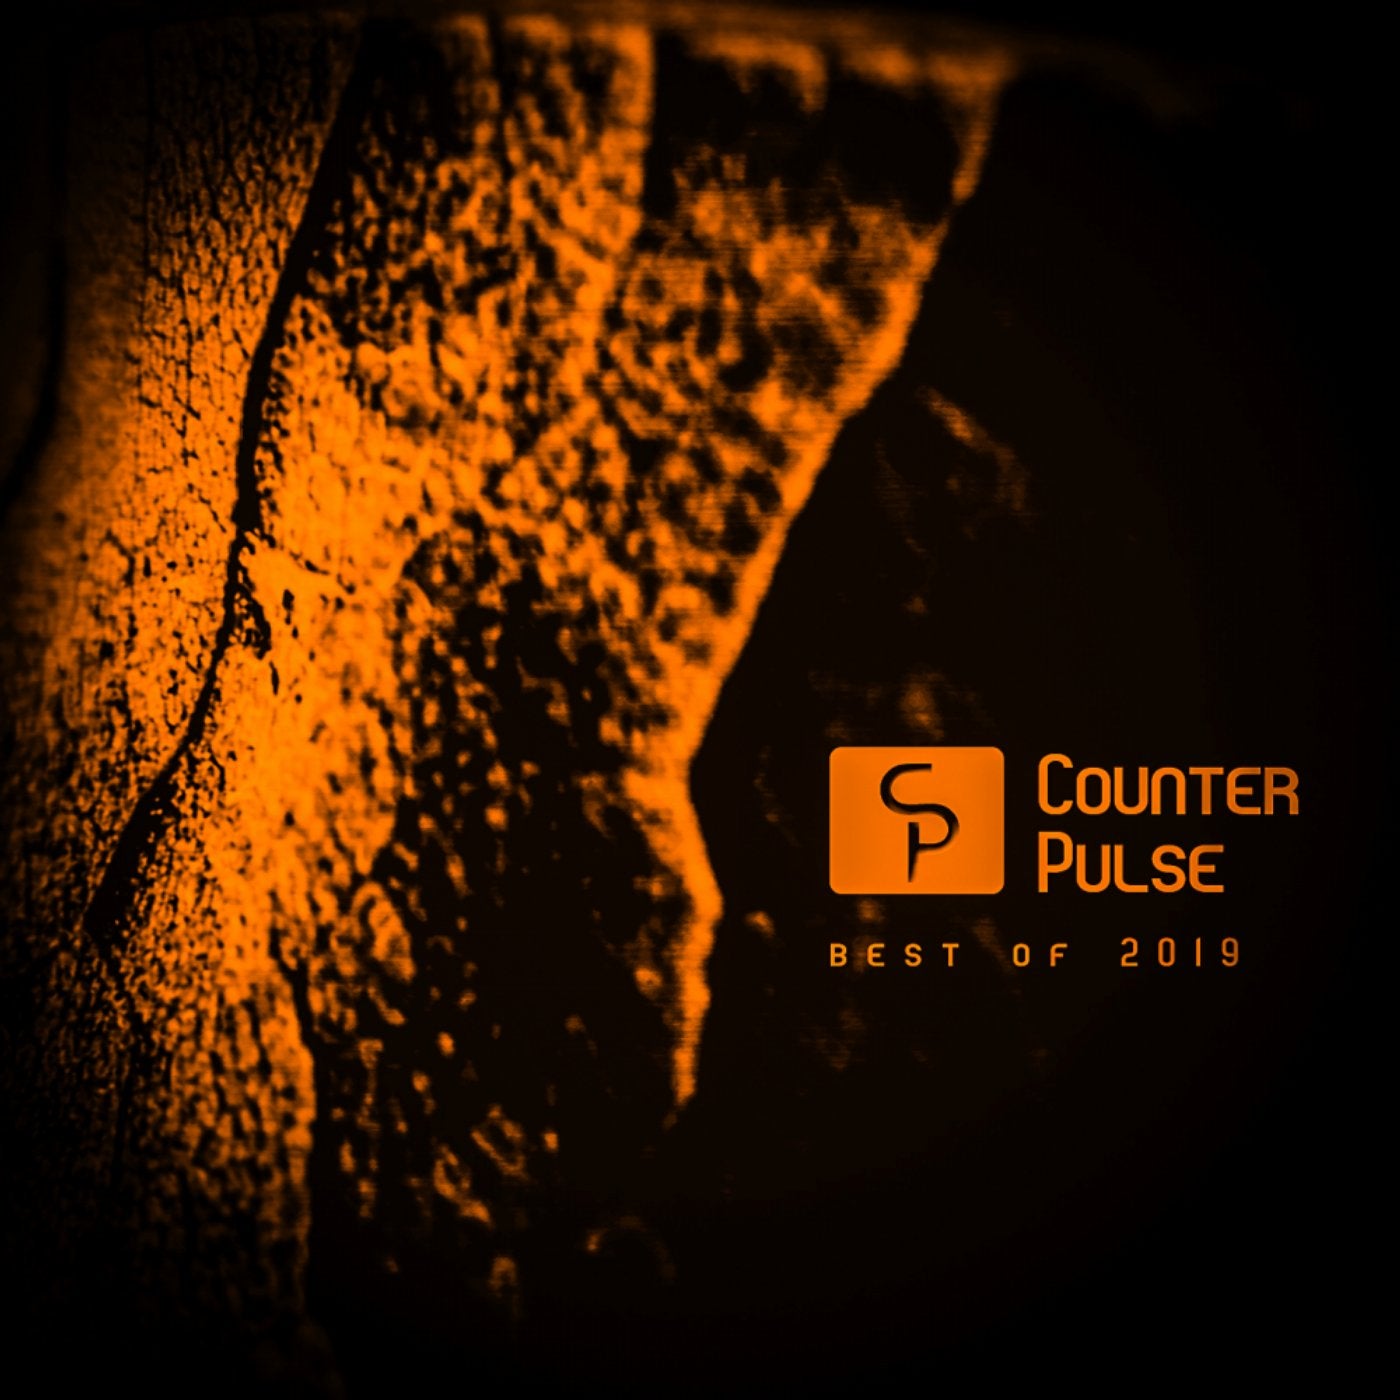 Counter Pulse: Best of 2019